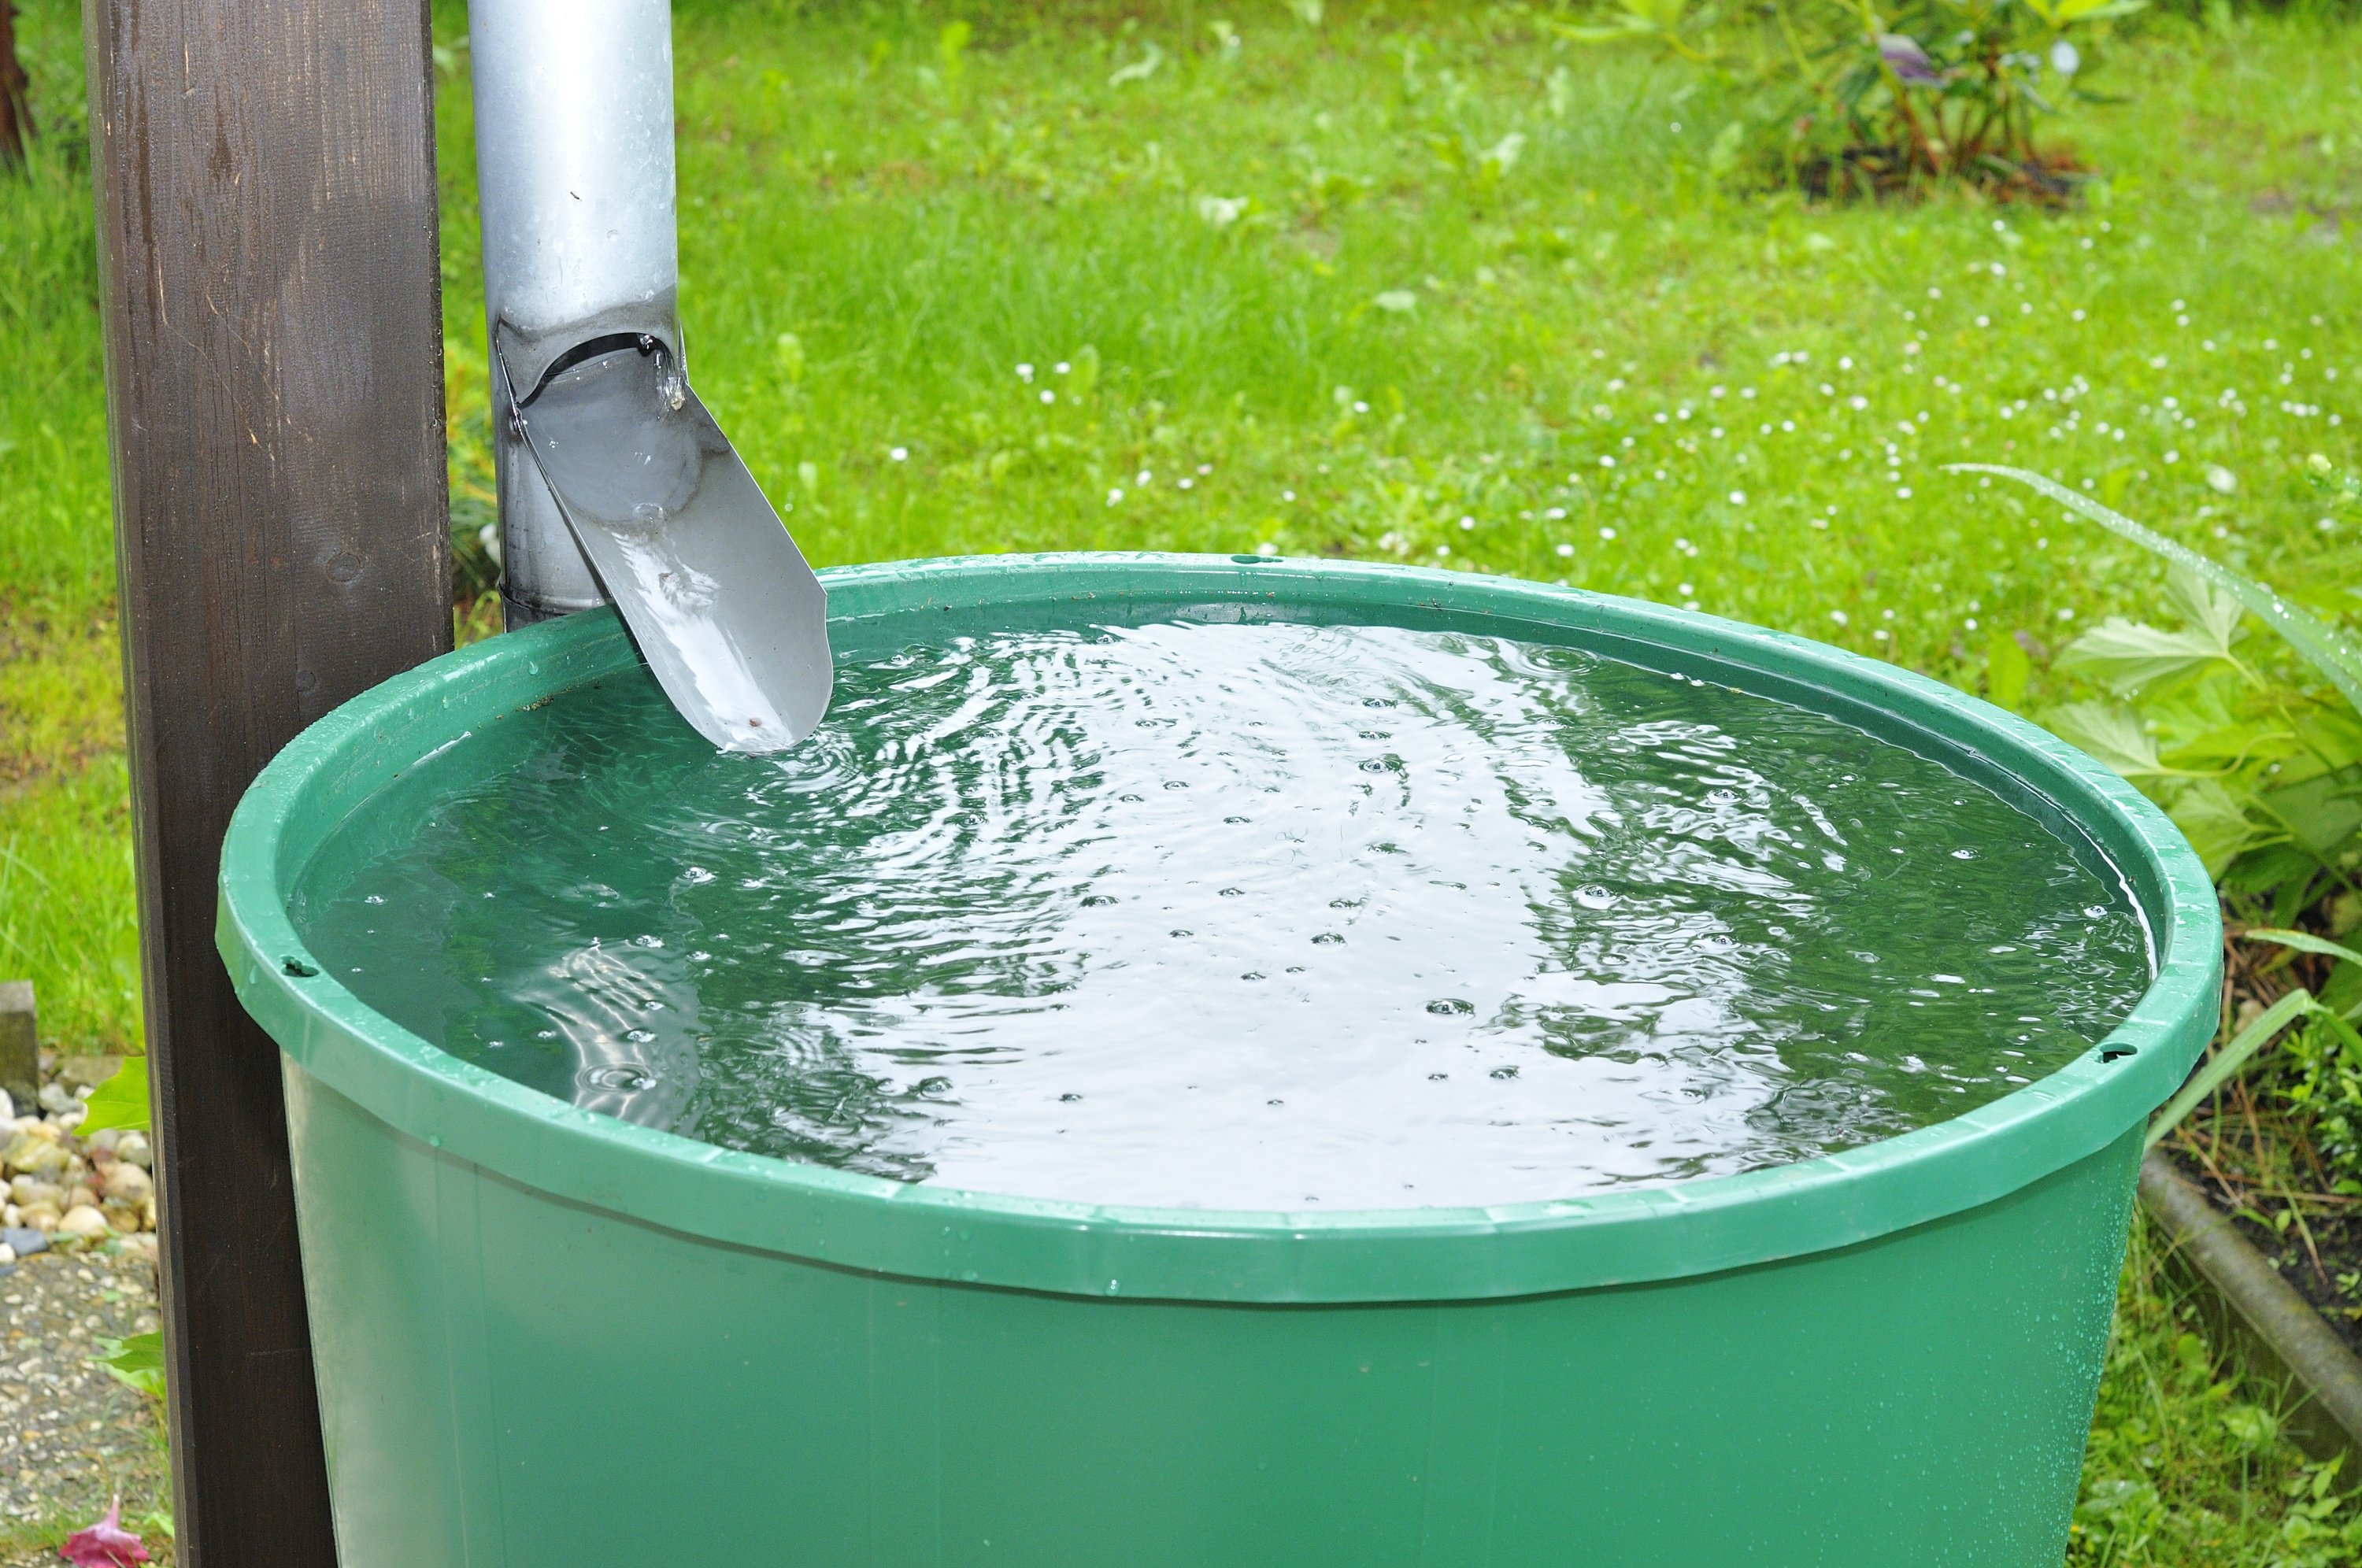 Rainwater is not only useful for watering the garden but also for cleaning and other things in the house. (Shutterstock Photo)